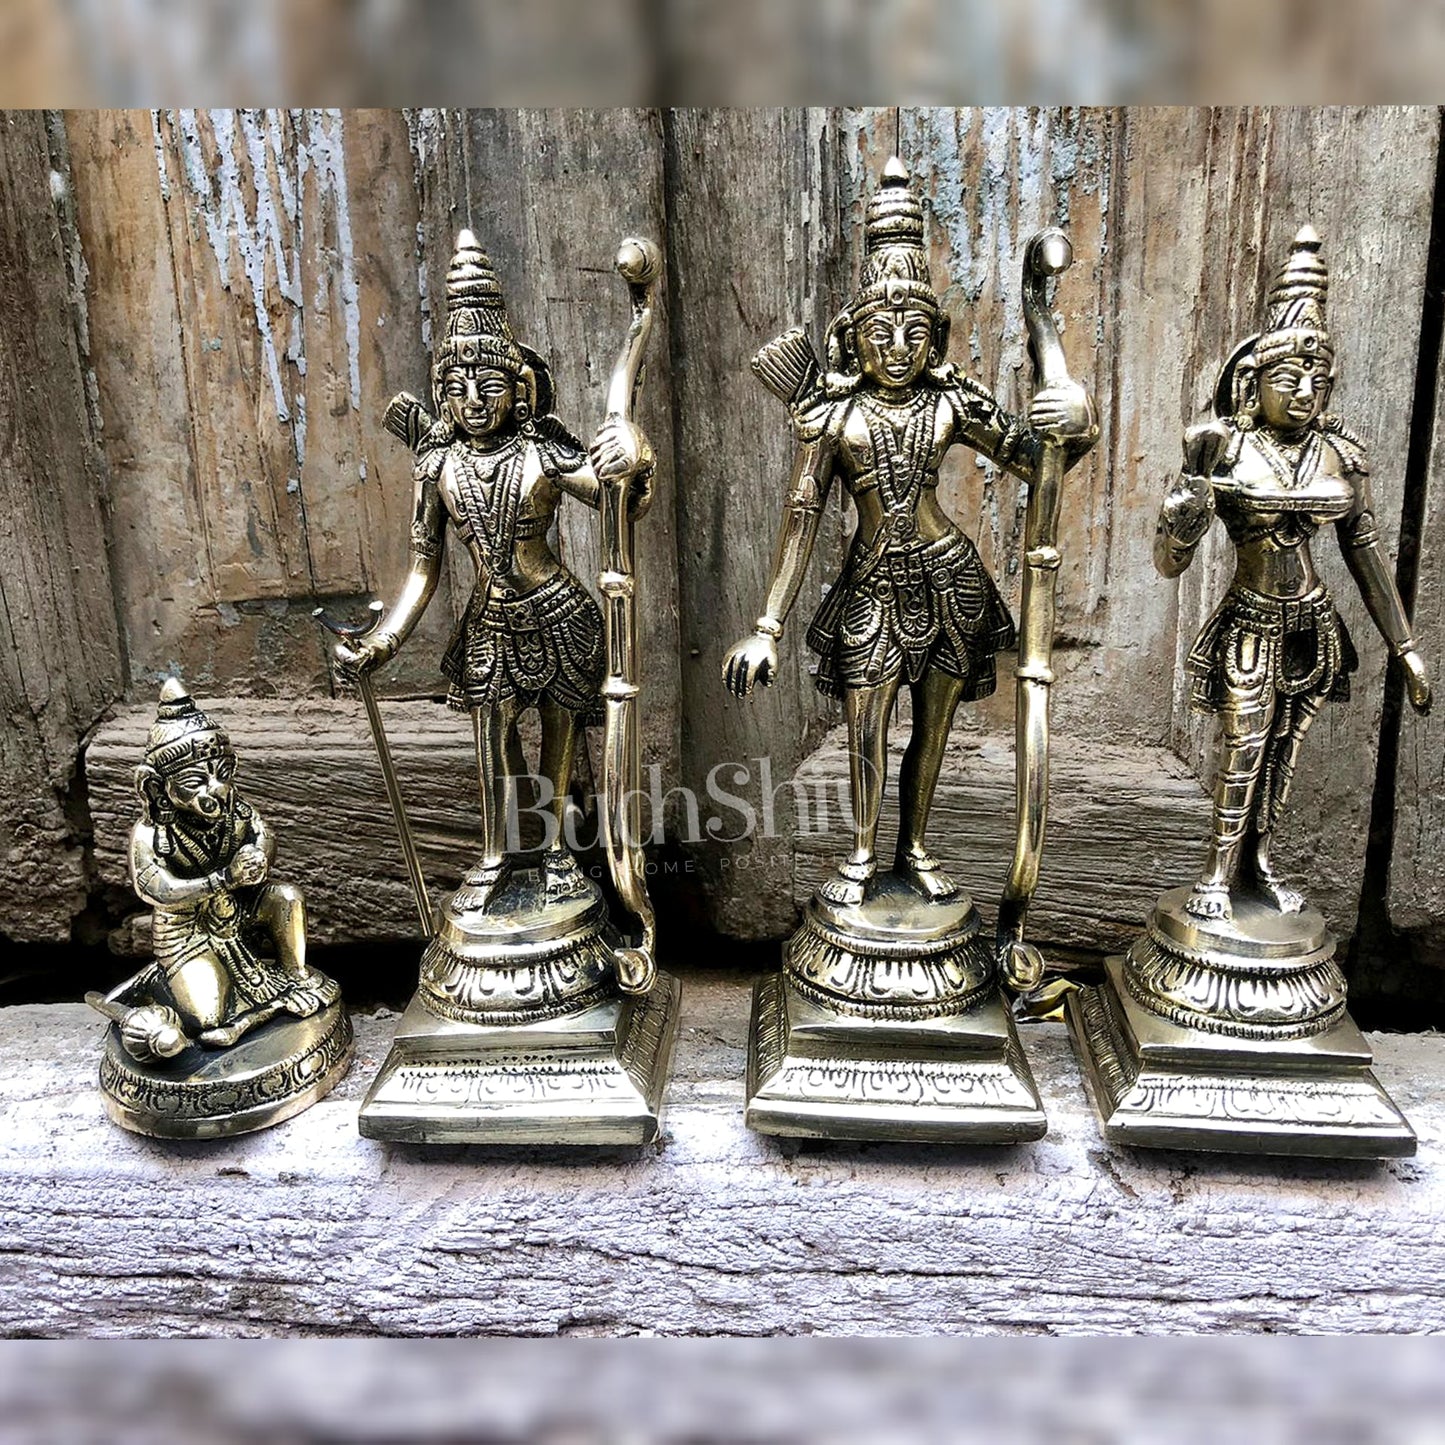 Handcrafted Brass Lord Rama with Sita, Lakshman, and Hanuman | Height 9 inches - Budhshiv.com